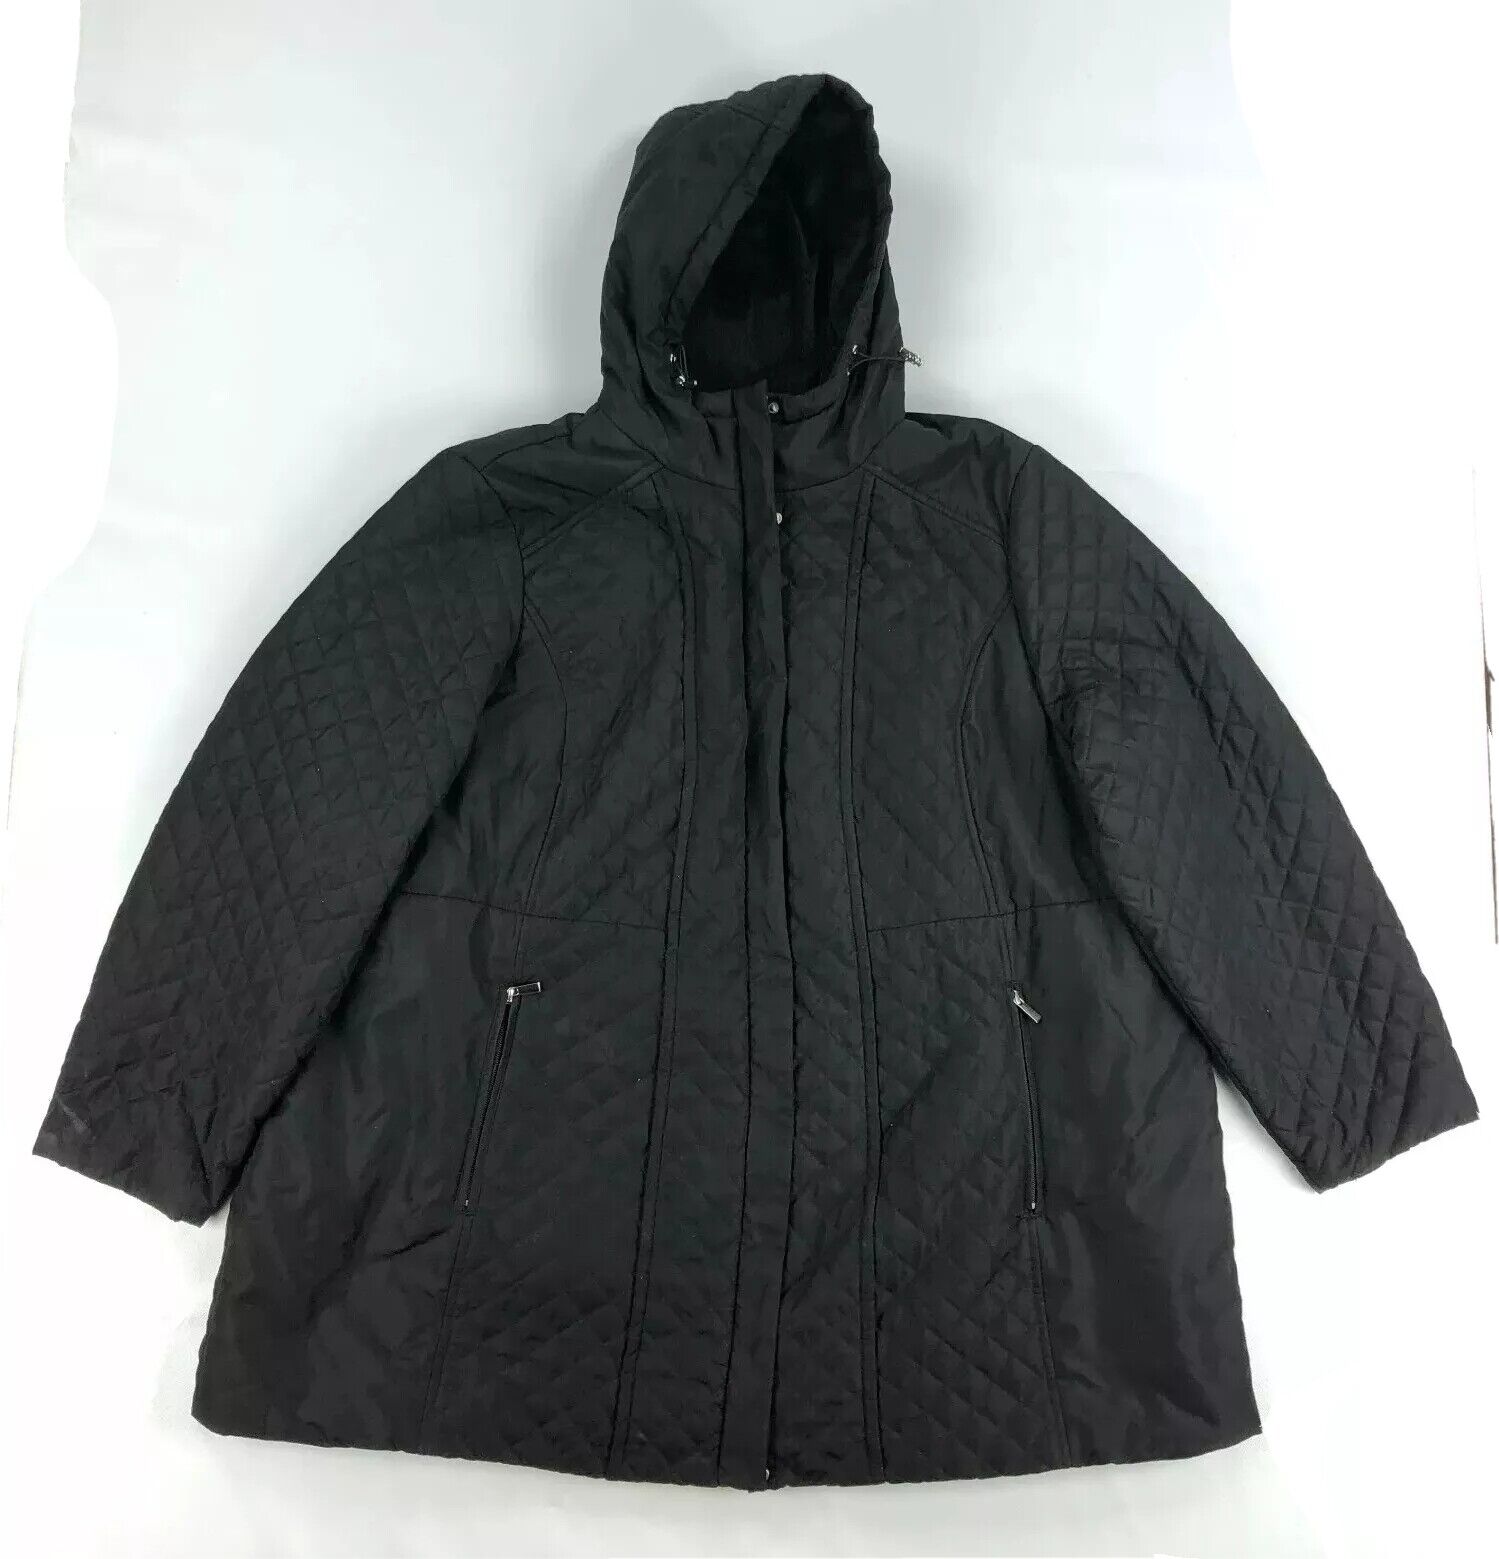 Catherines Quilted Jacket Womens 3X Plus Black Coat